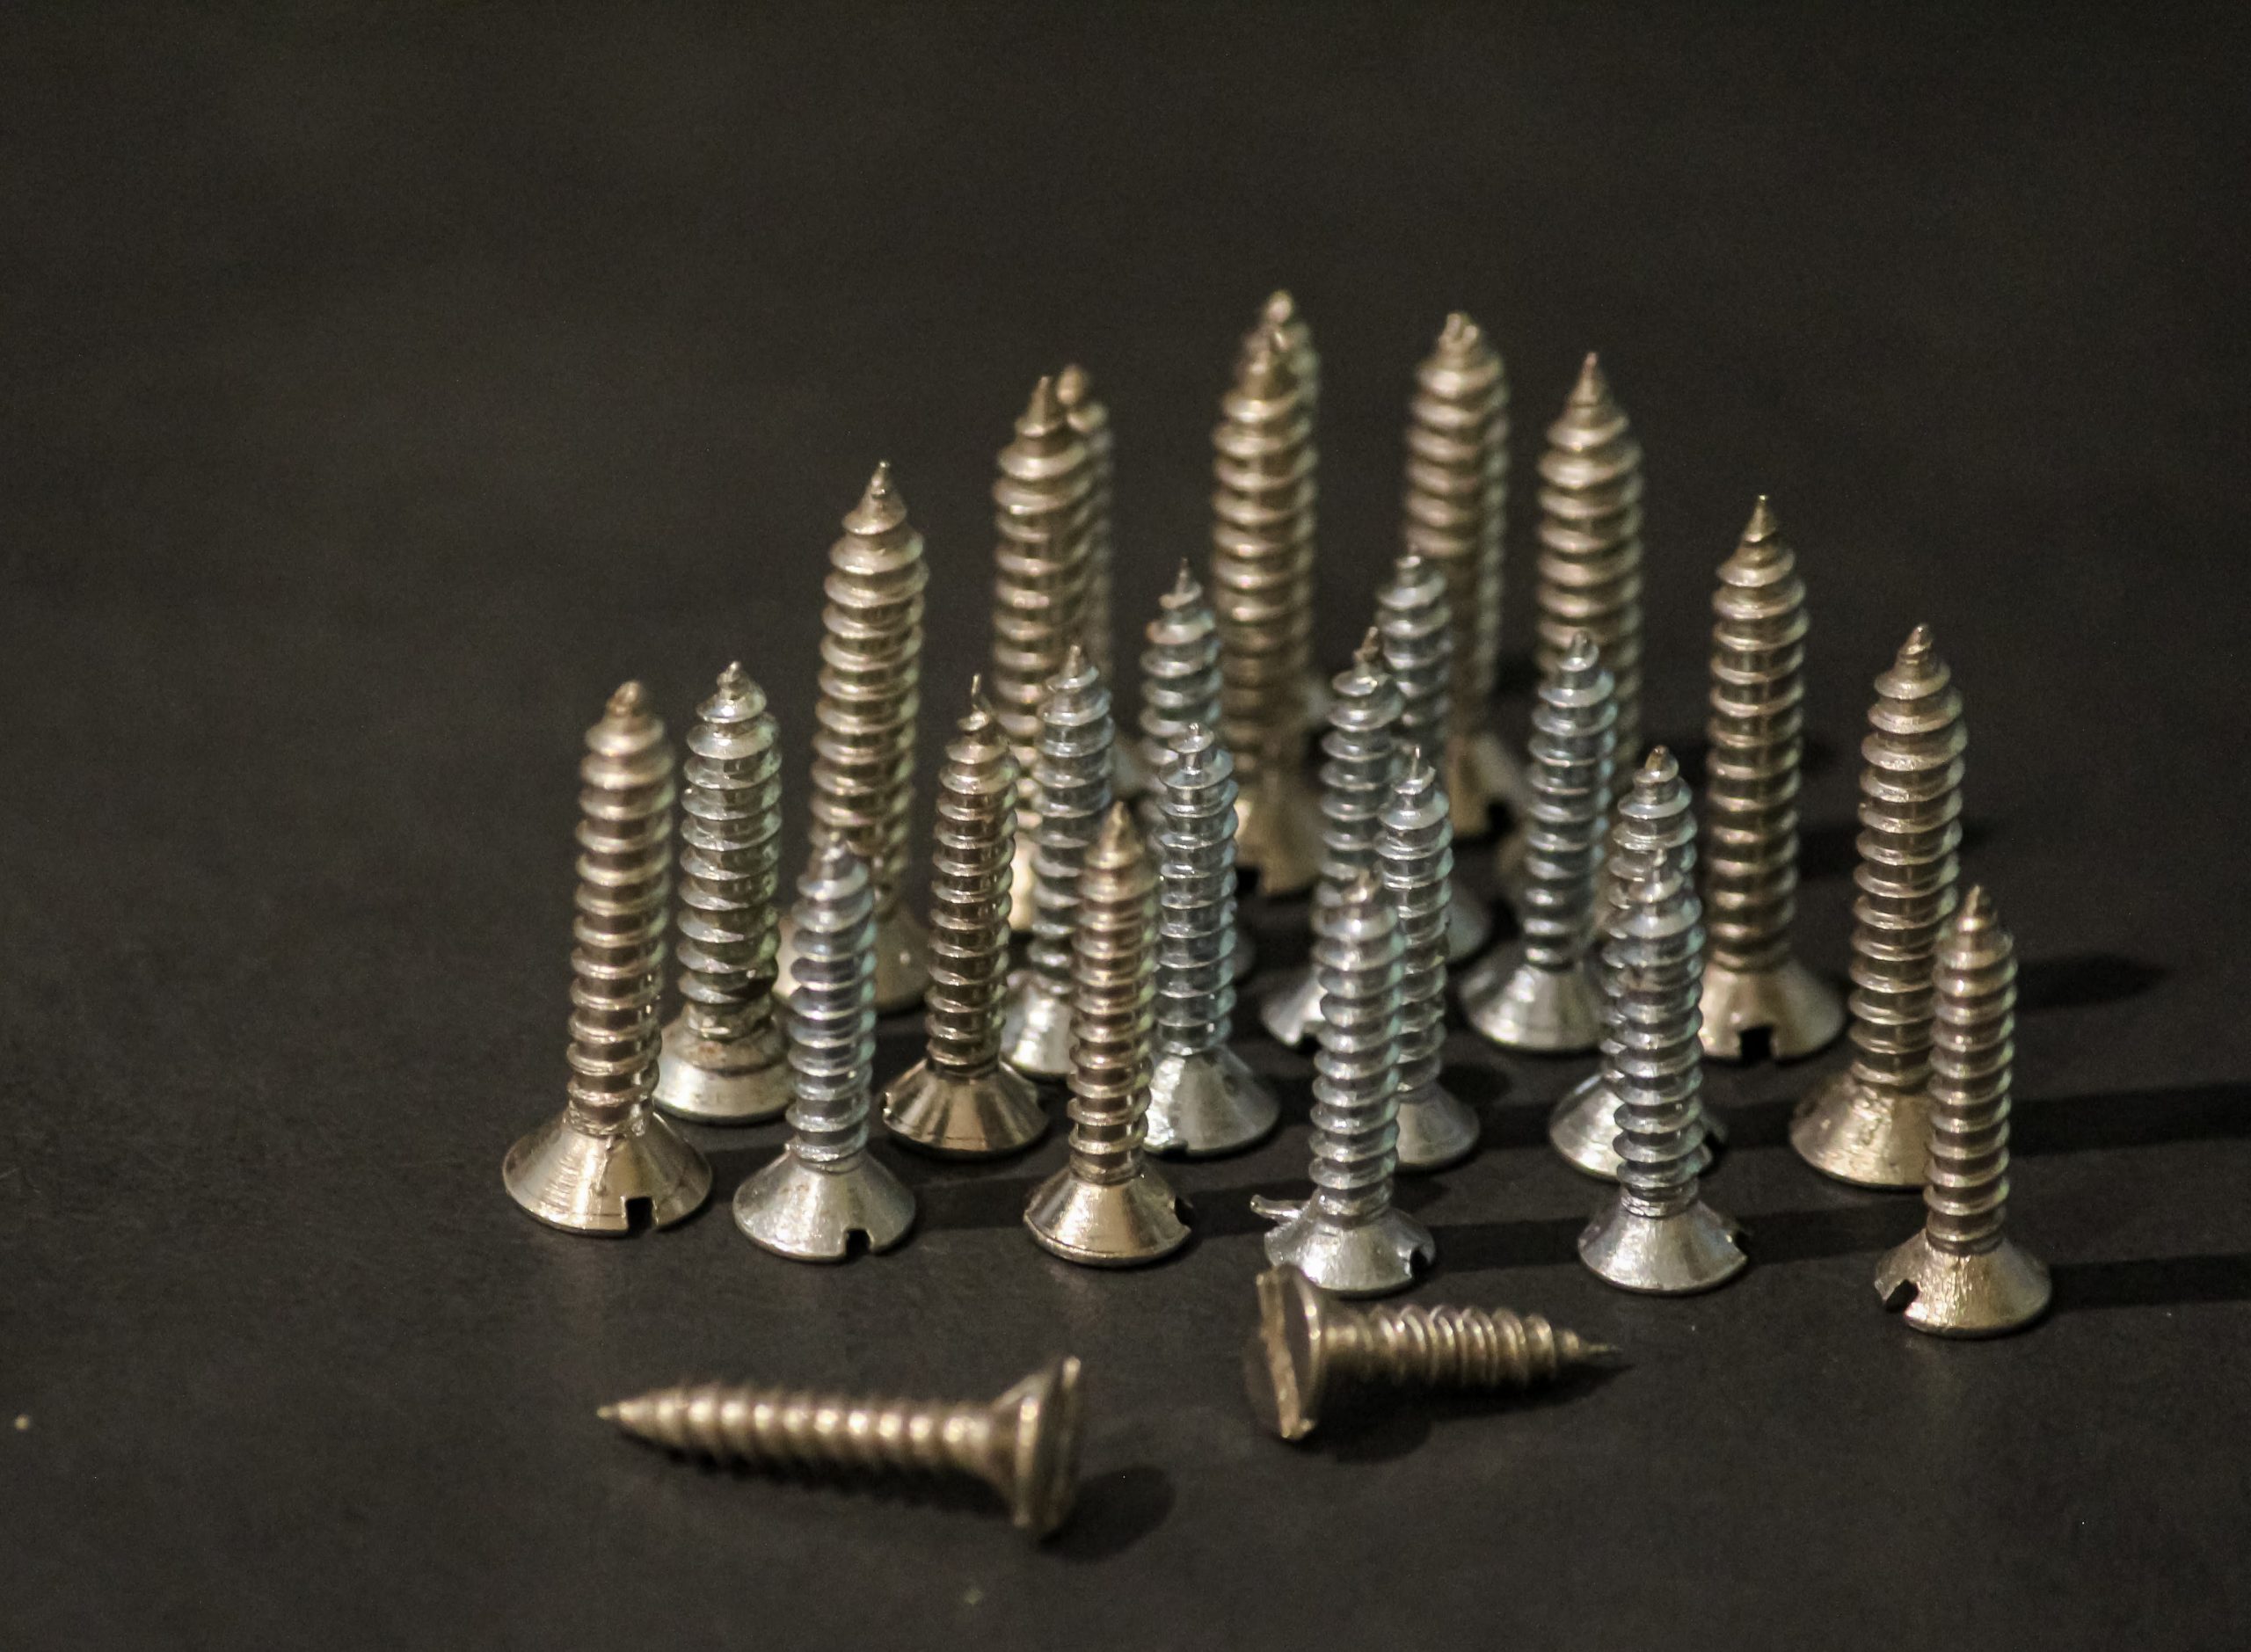 Screws for metallic and wooden work